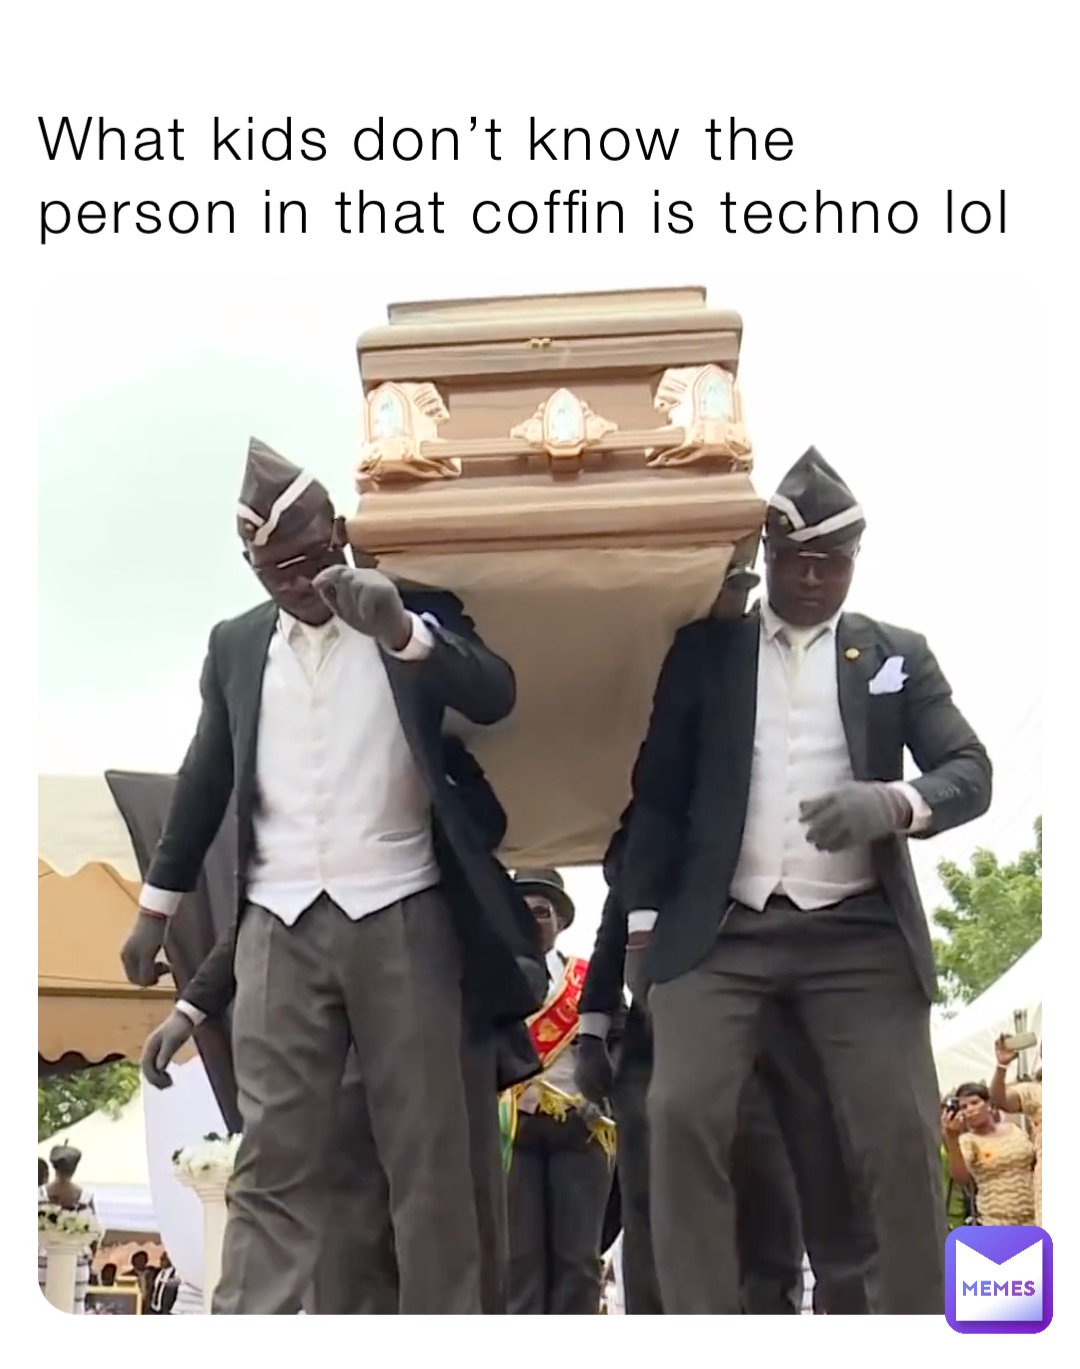 What kids don’t know the person in that coffin is techno lol